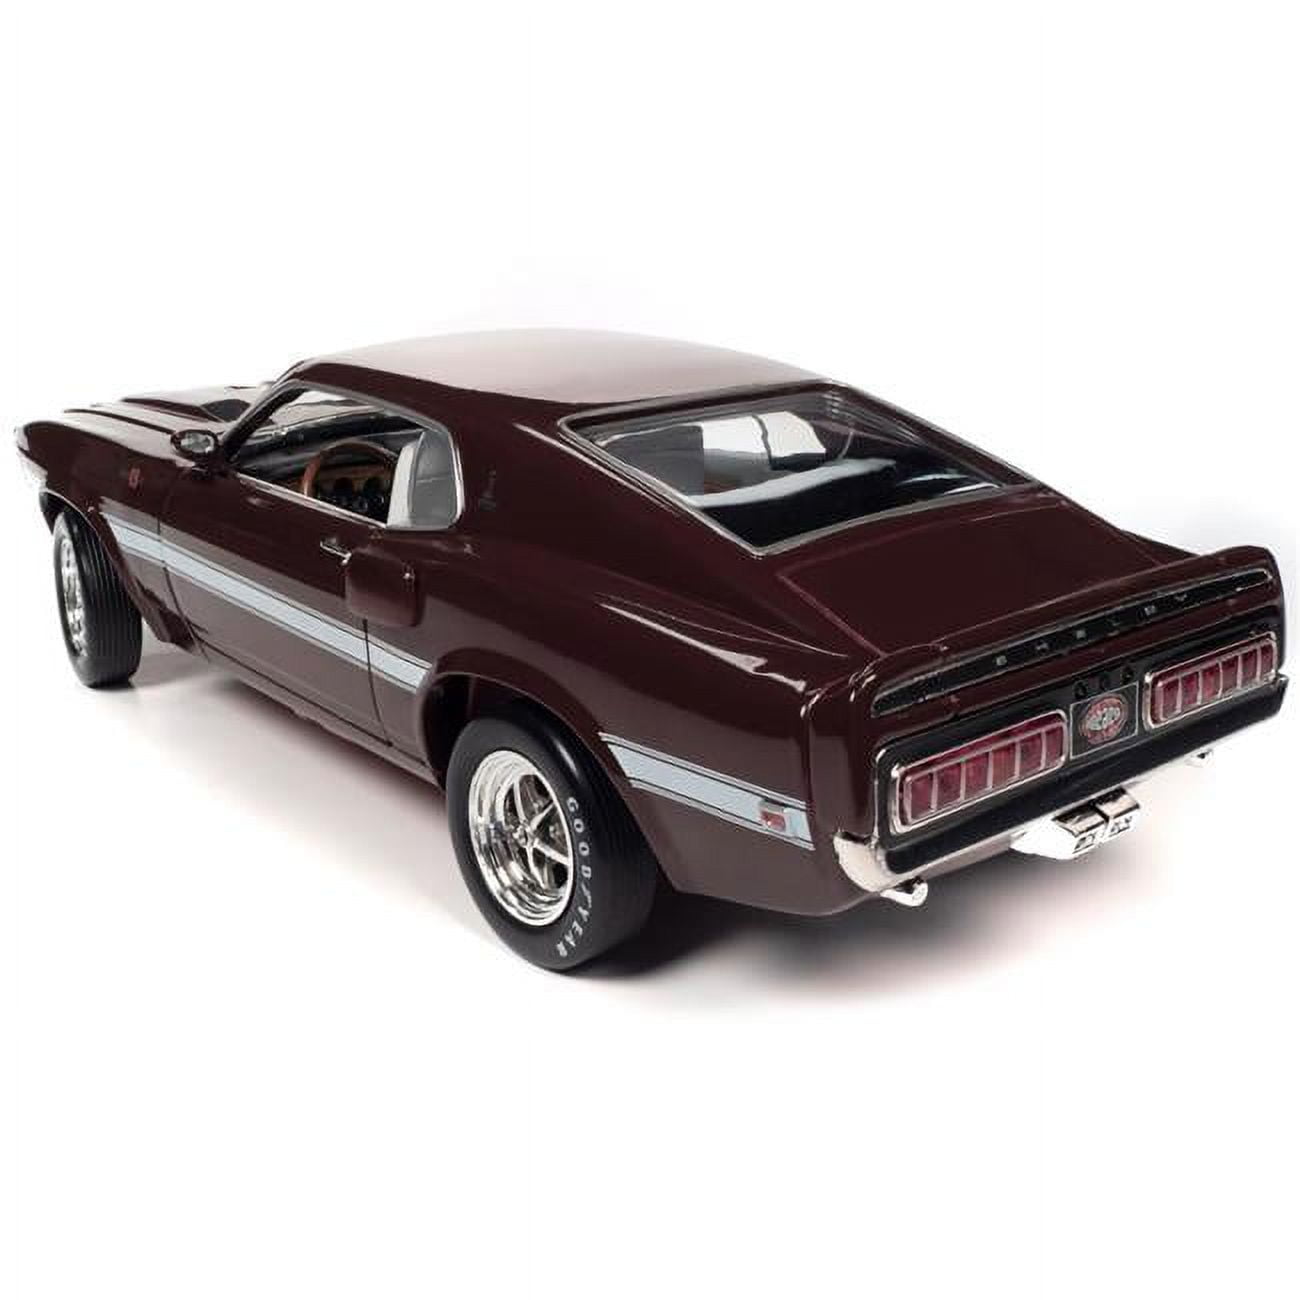 1969 Shelby Mustang GT-500 Royal Maroon with White Stripes & Interior Muscle Car & Corvette Nationals MCACN 1-18 Scale Diecast Model Car -  Grizzly Fitness, BE2952954